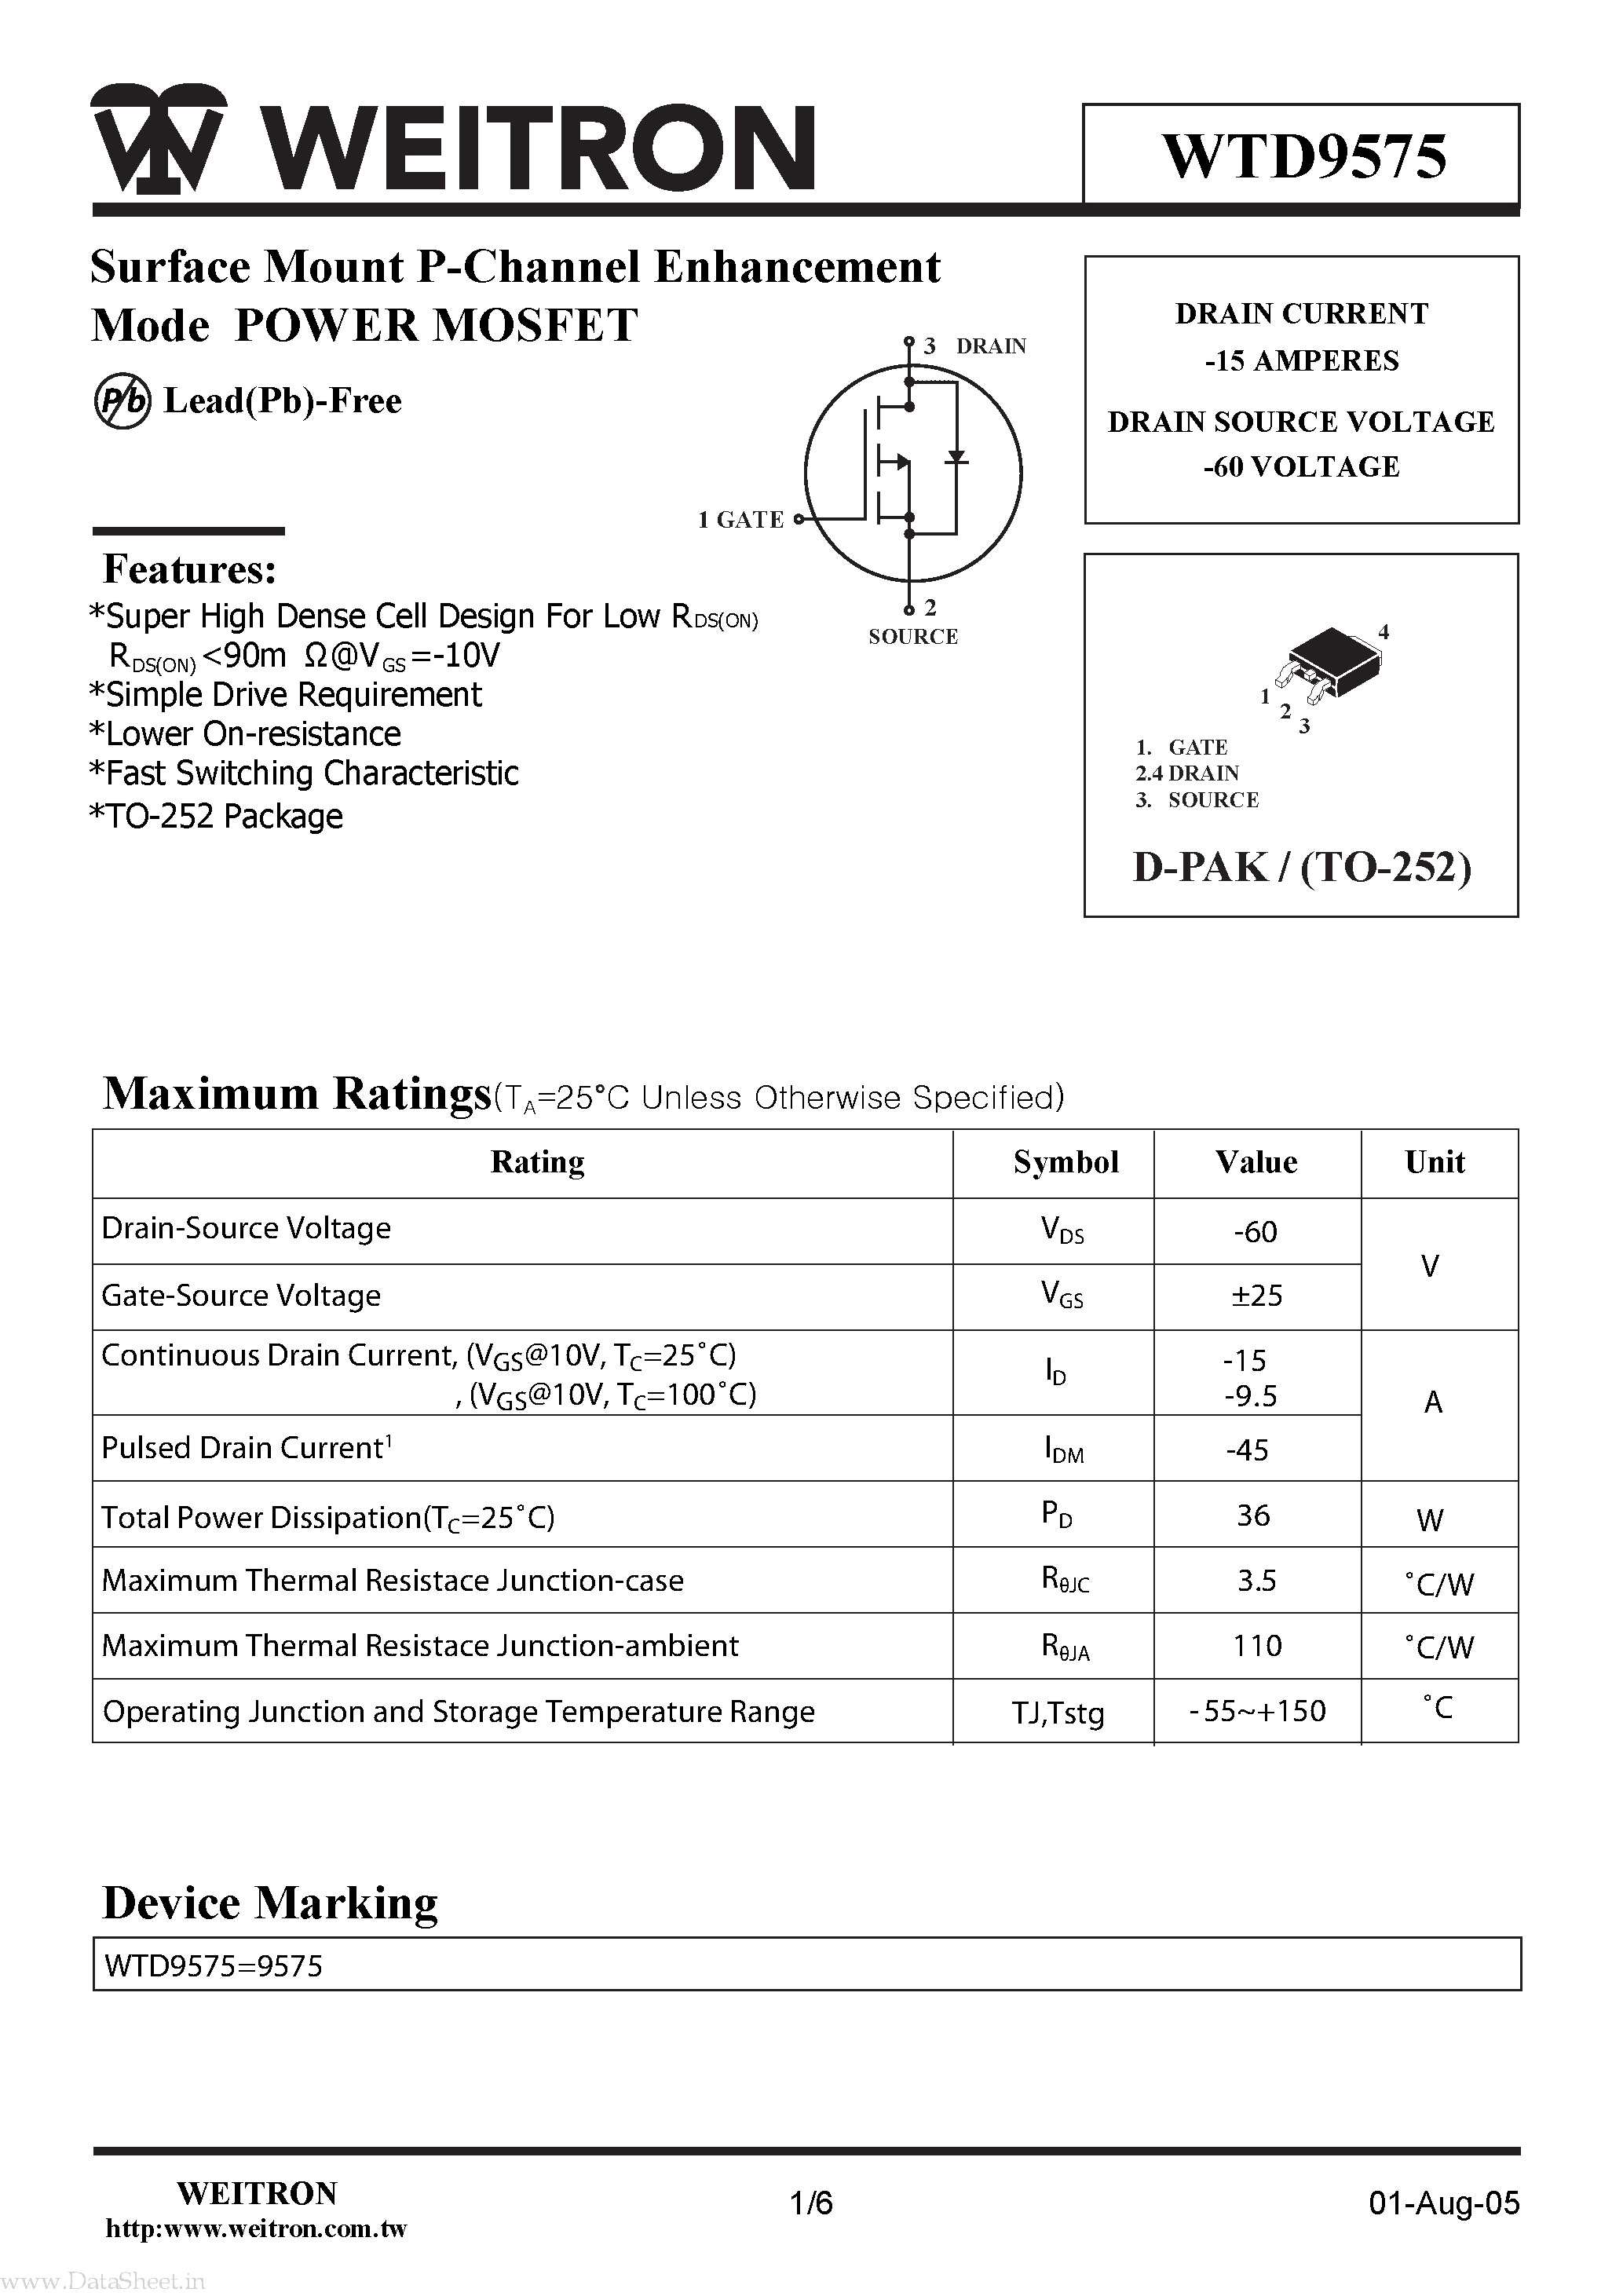 Datasheet WTD9575 - Surface Mount P-Channel Enhancement Mode POWER MOSFET page 1